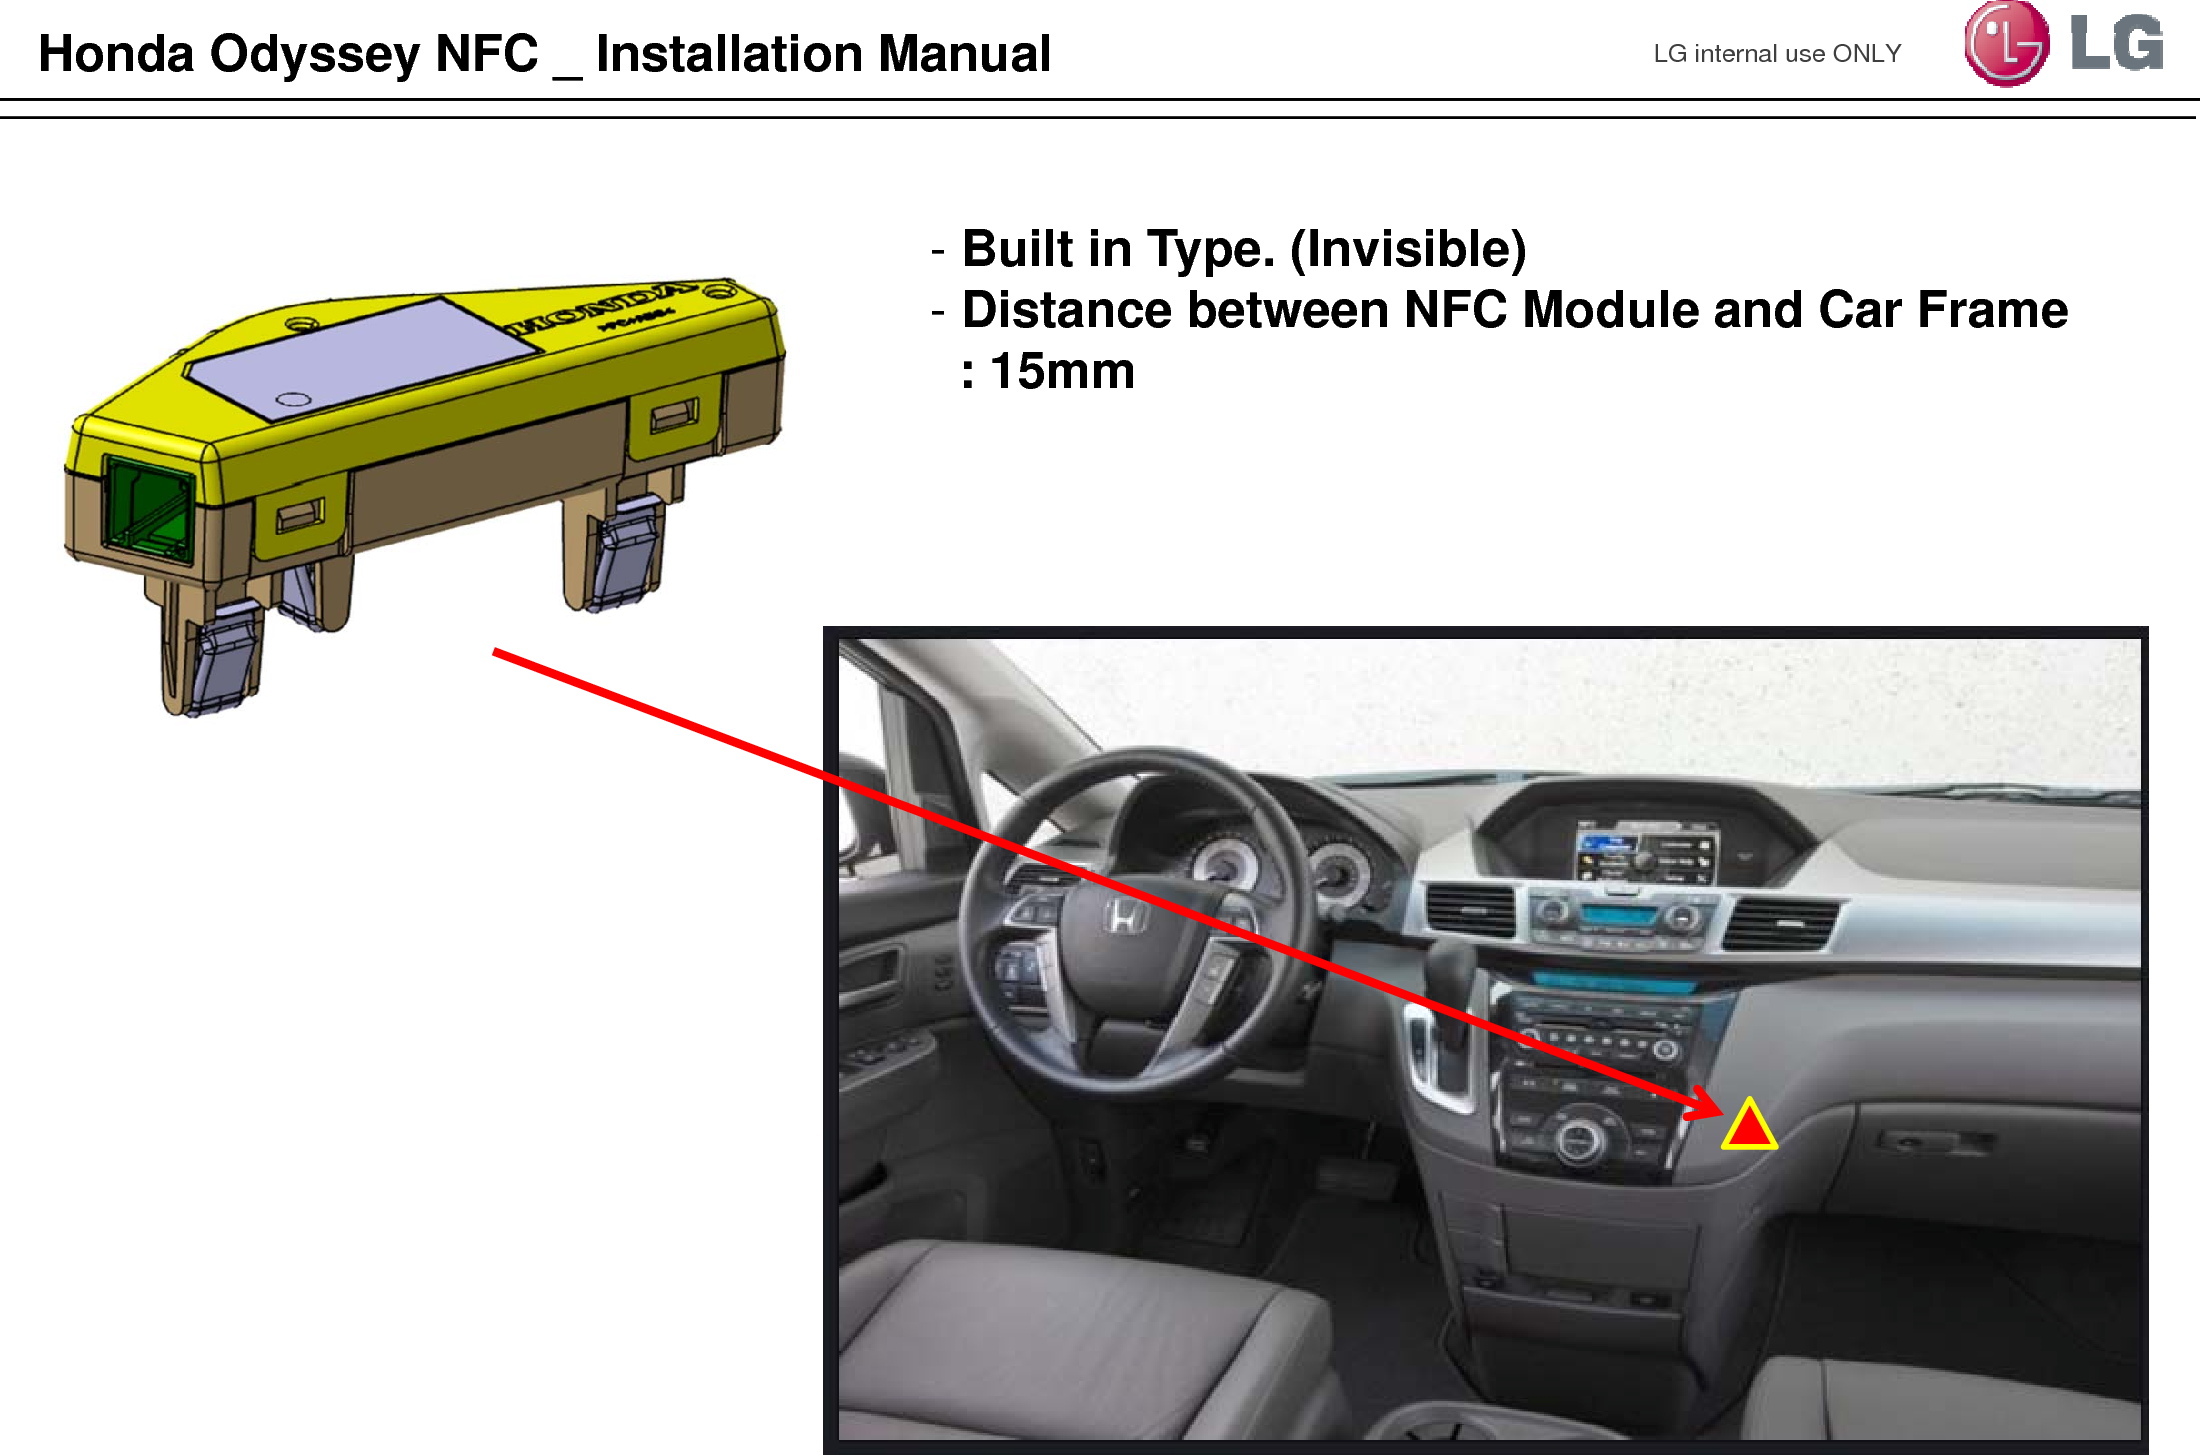 LG internal use ONLYHonda Odyssey NFC _ Installation Manual-Built in Type. (Invisible)-Distance between NFC Module and Car Frame: 15mm